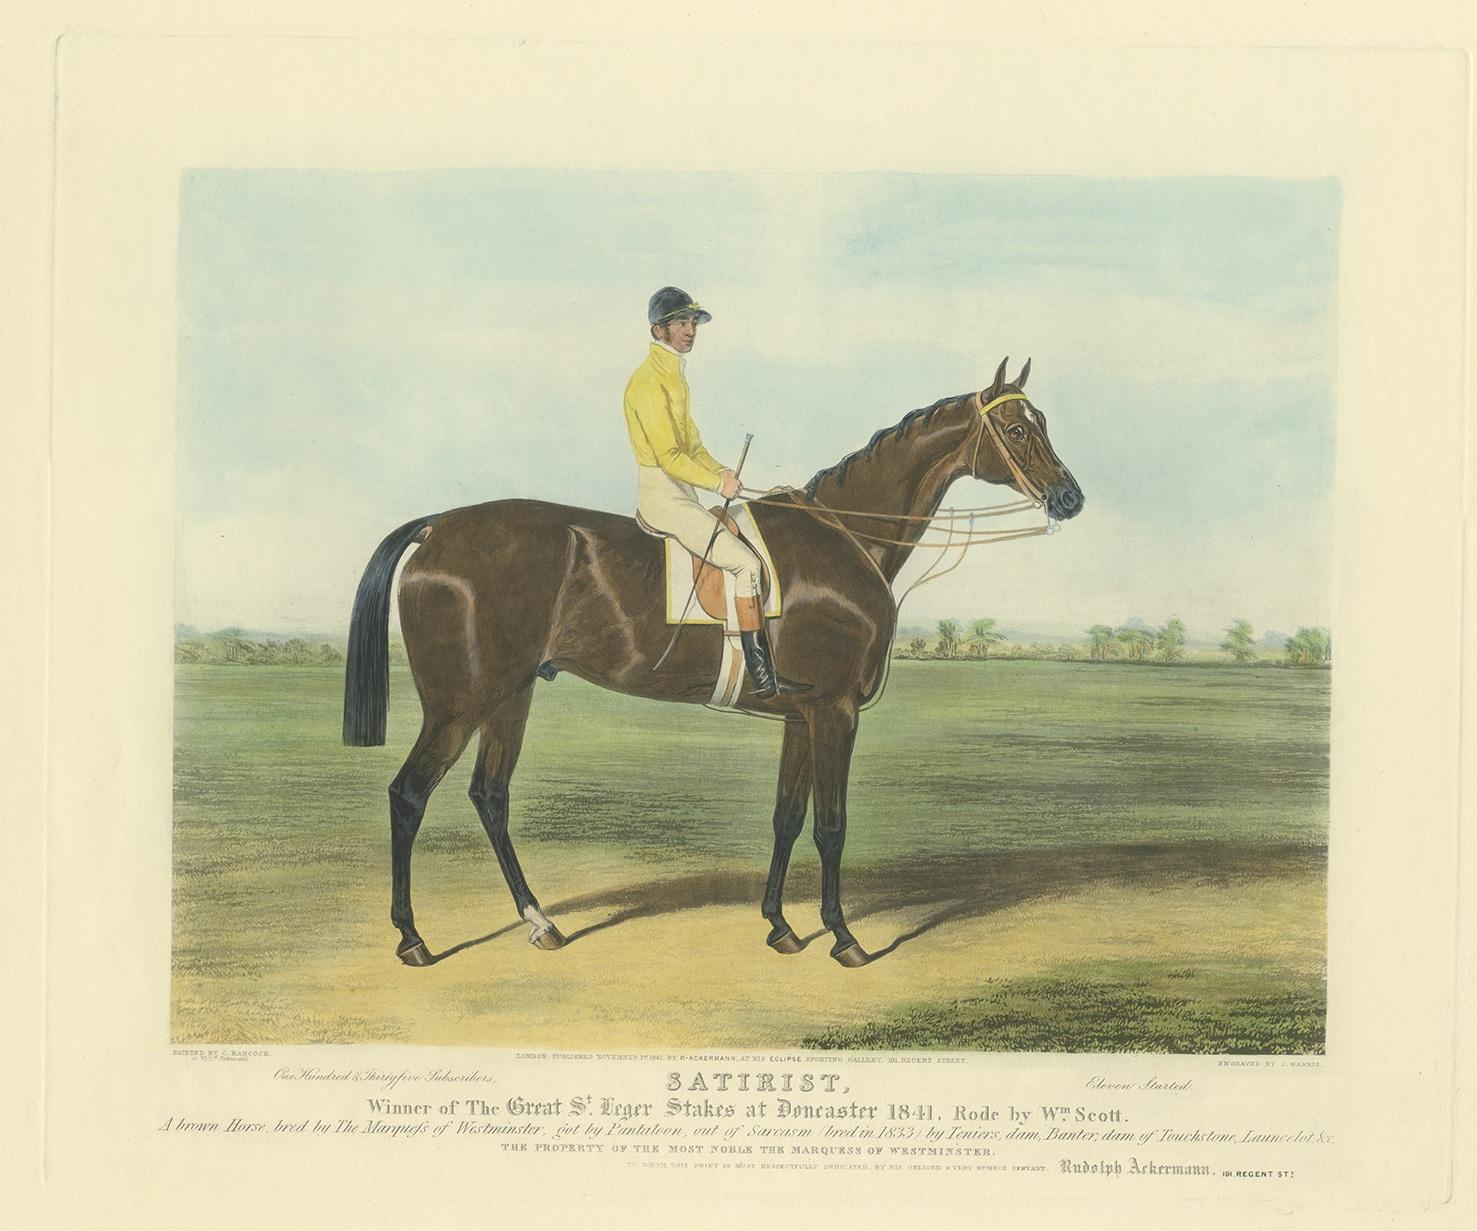 Antique horse print titled 'Satirist, winner of the Great St. Leger at Doncaster, 1841'. This aquatint print shows a winning horse and jockey of the Great St. Leger Stakes at Doncaster. Army officer, MP for Grimsby (1768–74) and racing enthusiast